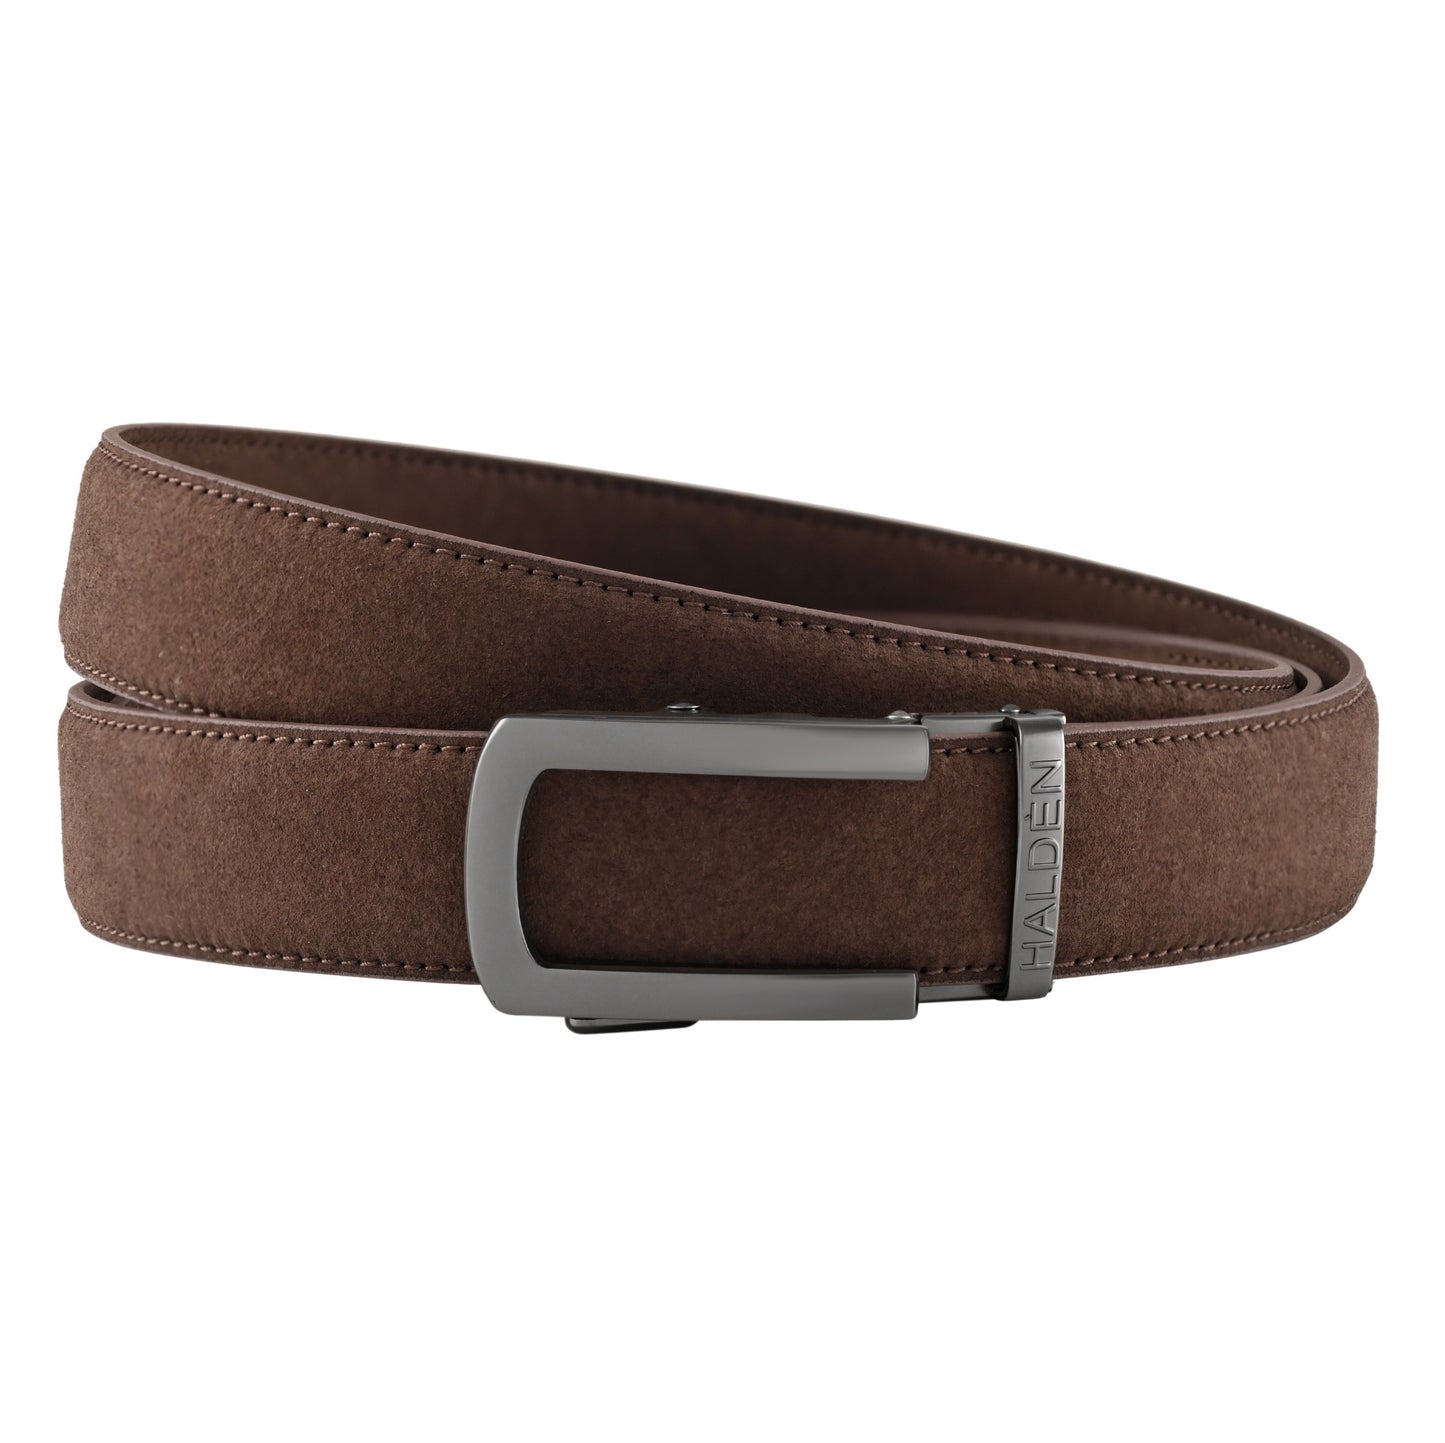 Micro fiber suede brown with classic buckle